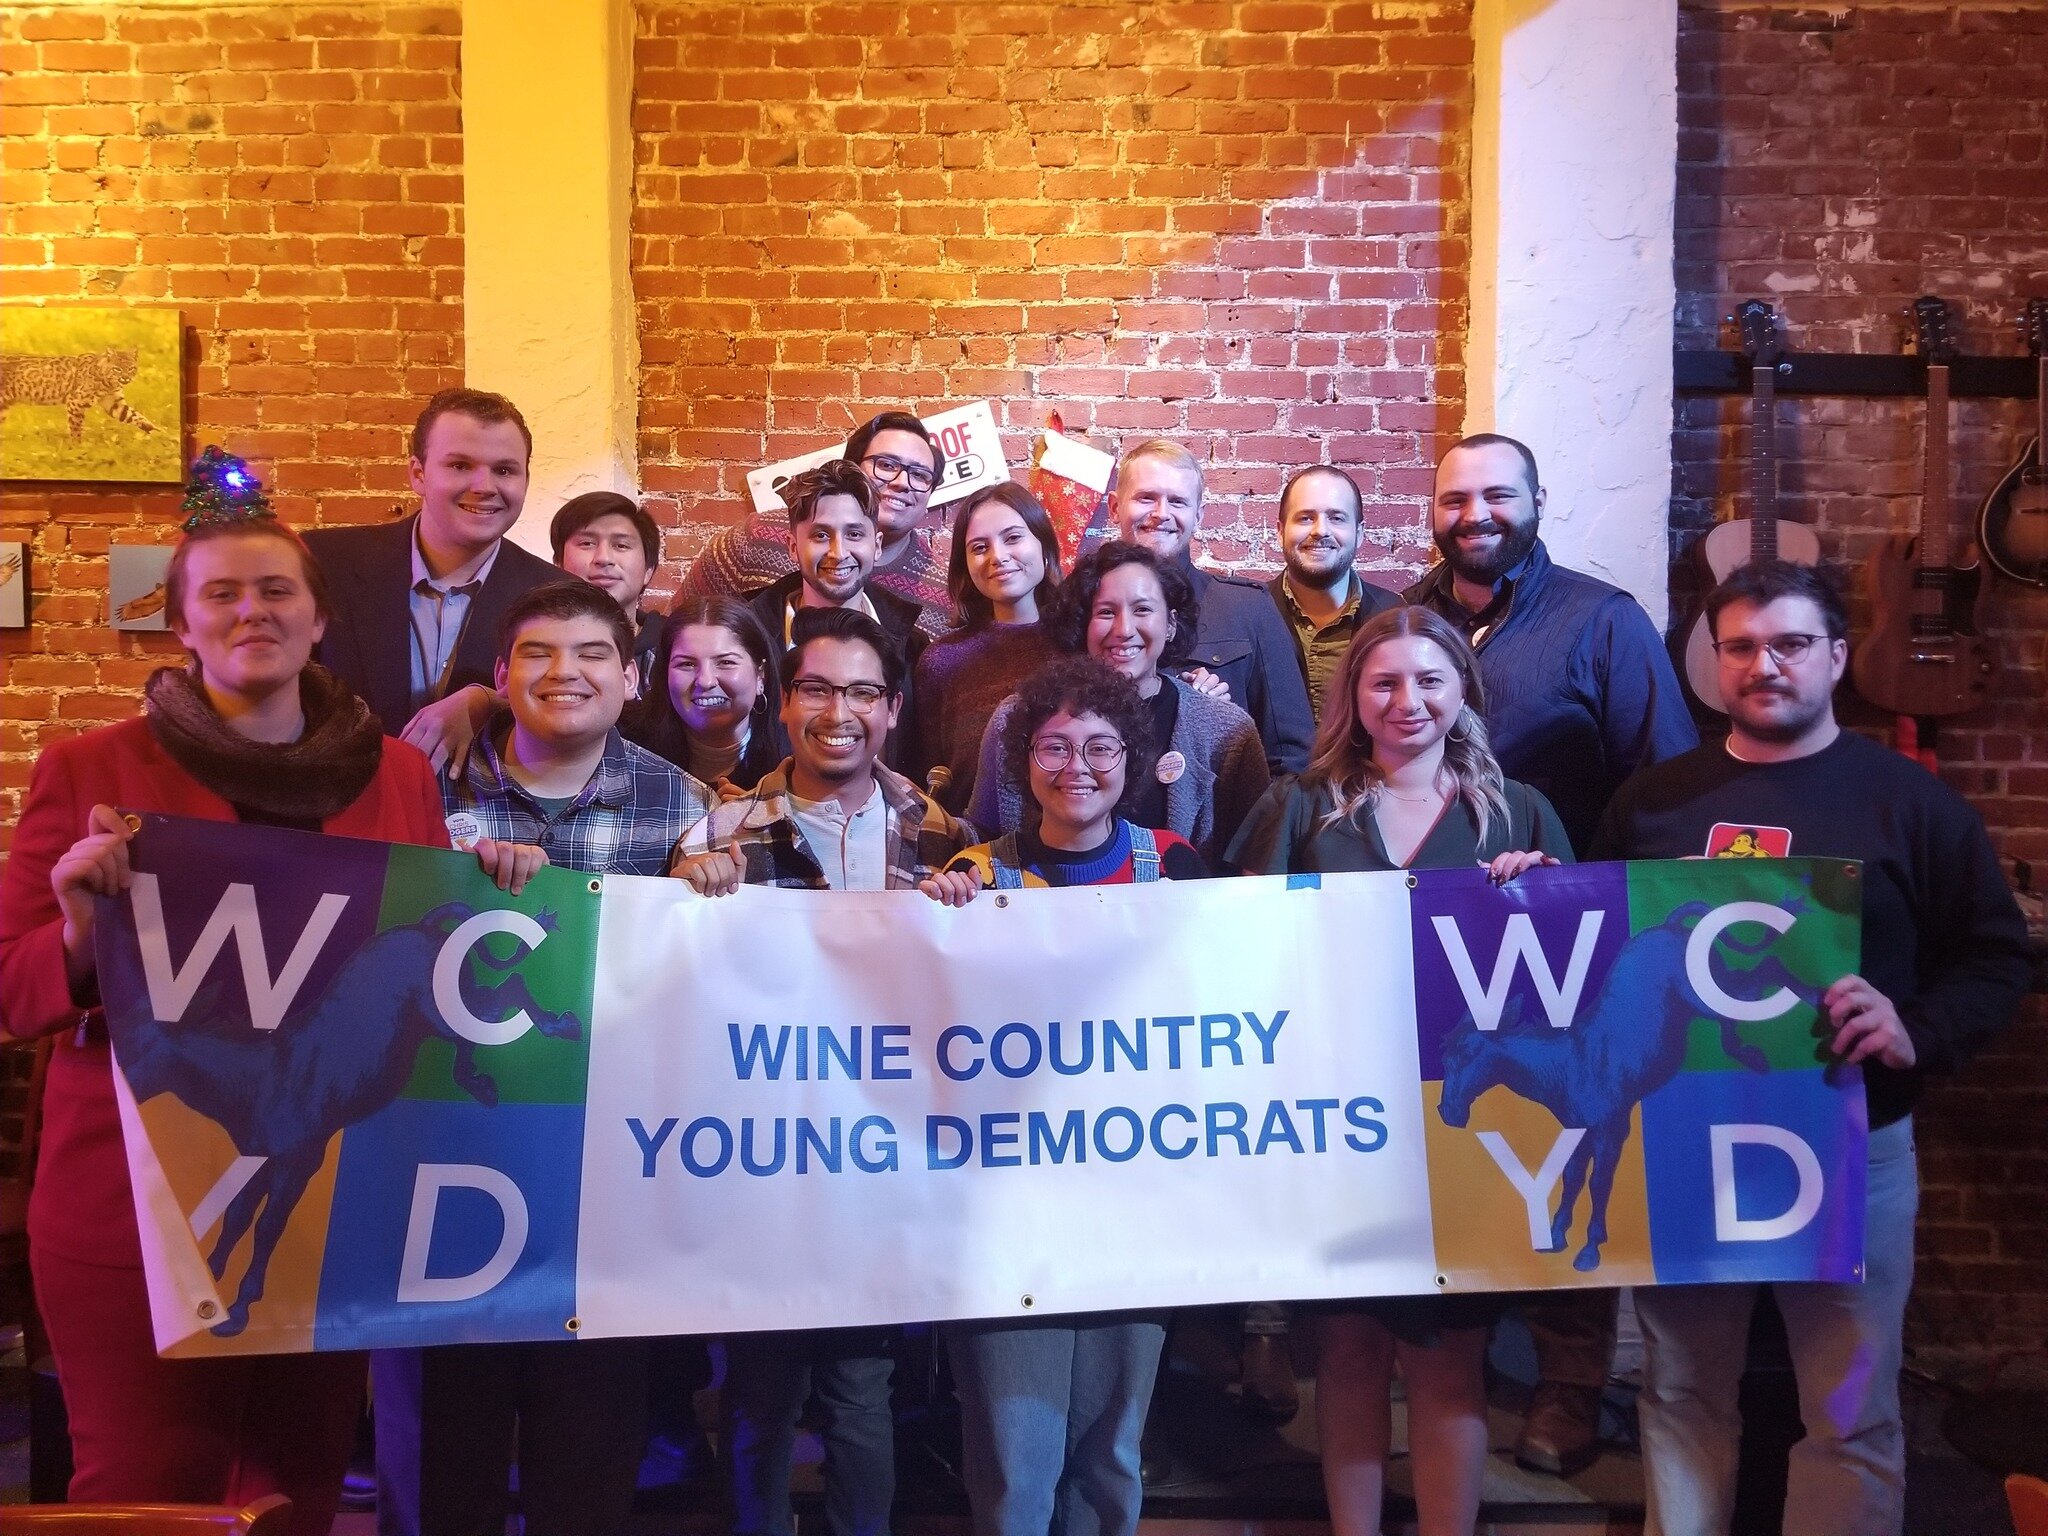 It was great to see new and old faces last night at the Sonoma County Democratic Party/Wine Country Young Democrats Holiday Social and Trivia Night! While we didn't manage to triumph in trivia this year, we'll be back for revenge in 2024! Thank you t